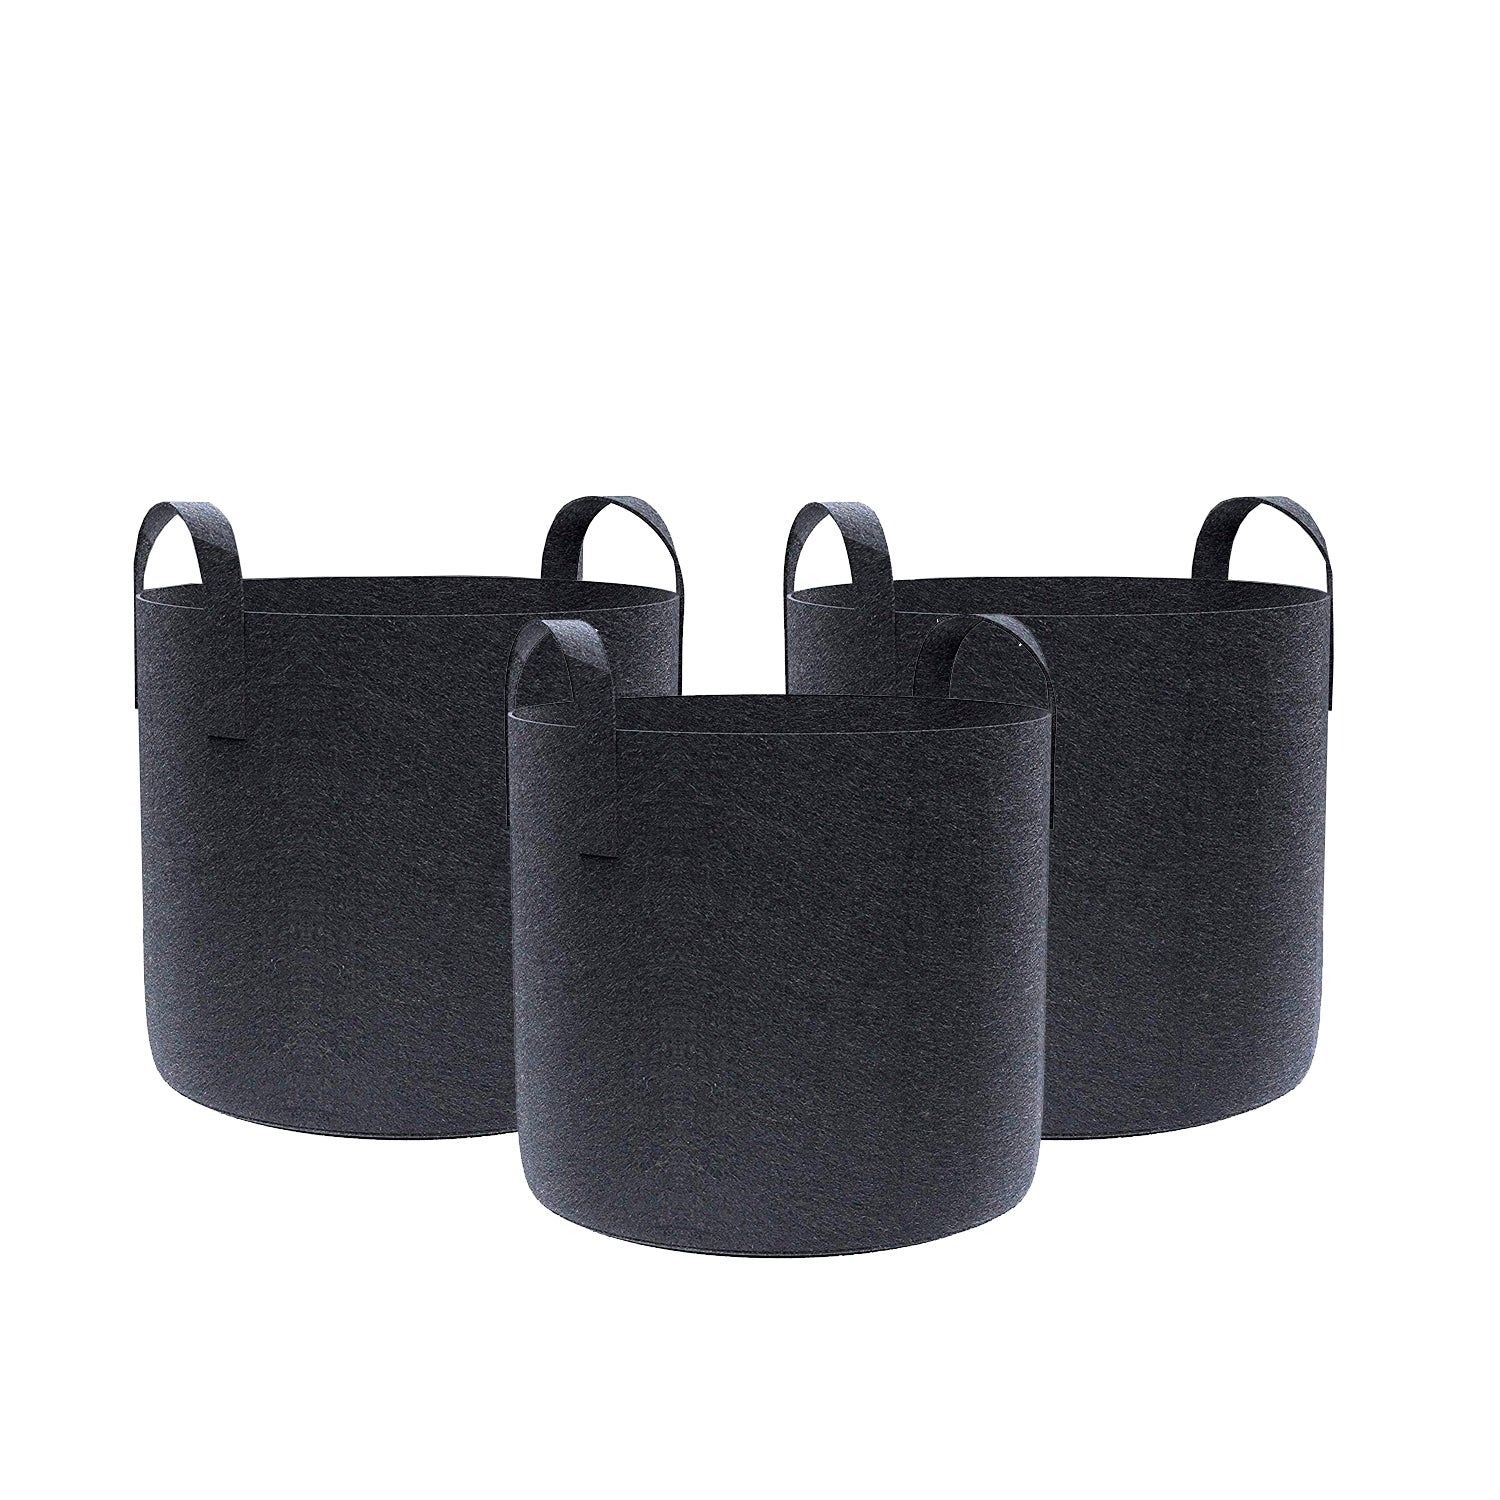 DS BS 3 Pack Garden Plant Fabric Grow Bags 55L